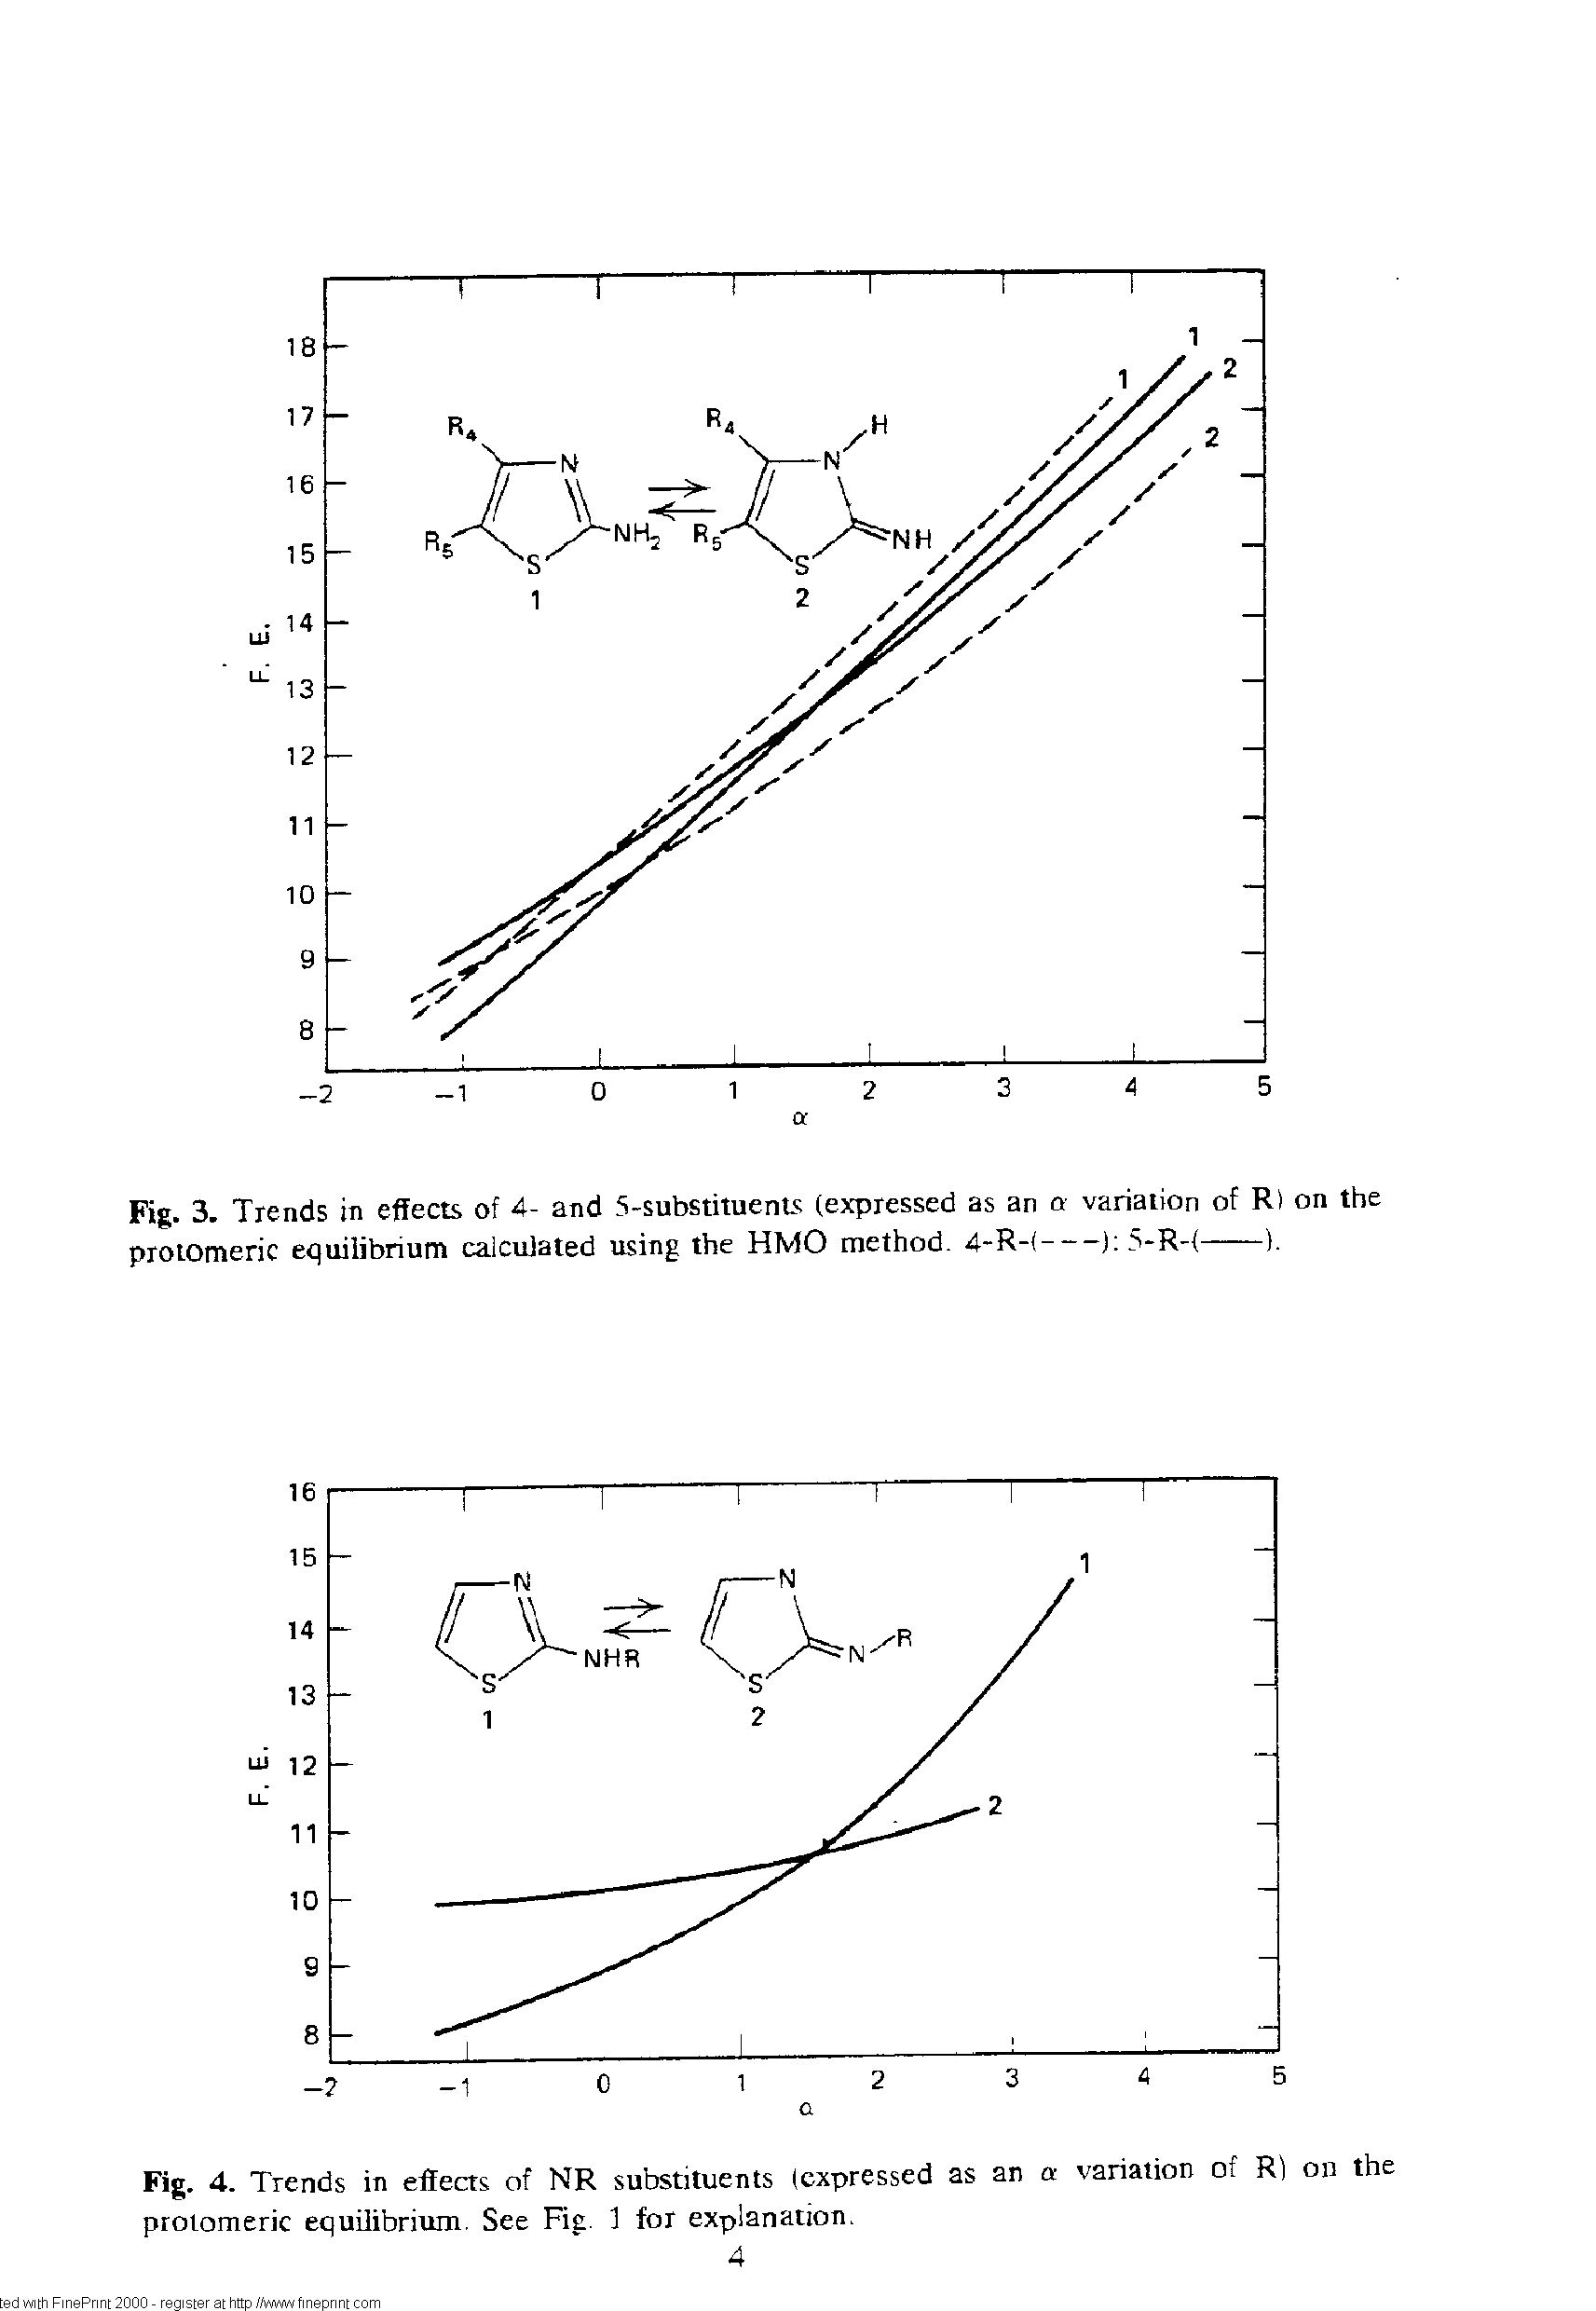 Fig. 4. Trends in effects of NR substituents (expressed as an a variation of R) on the protomeric equiltbrium. See Fig. 1 for explanation.